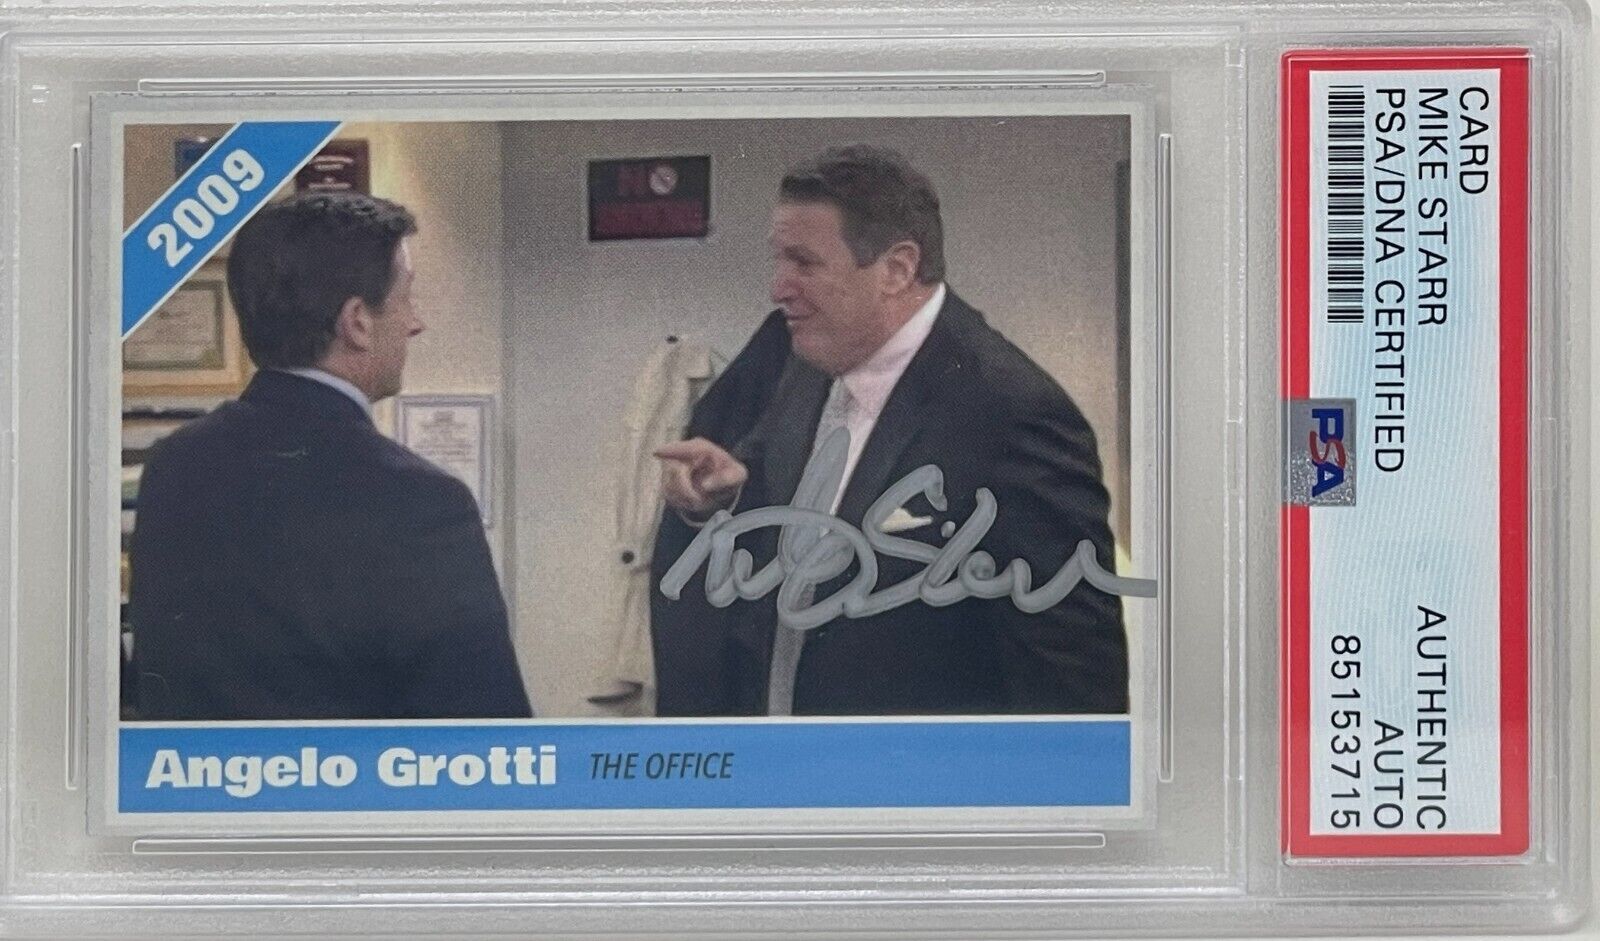 Mike Starr Signed The Office TV Show Angelo Grotti Steve Carell Trading Card PSA